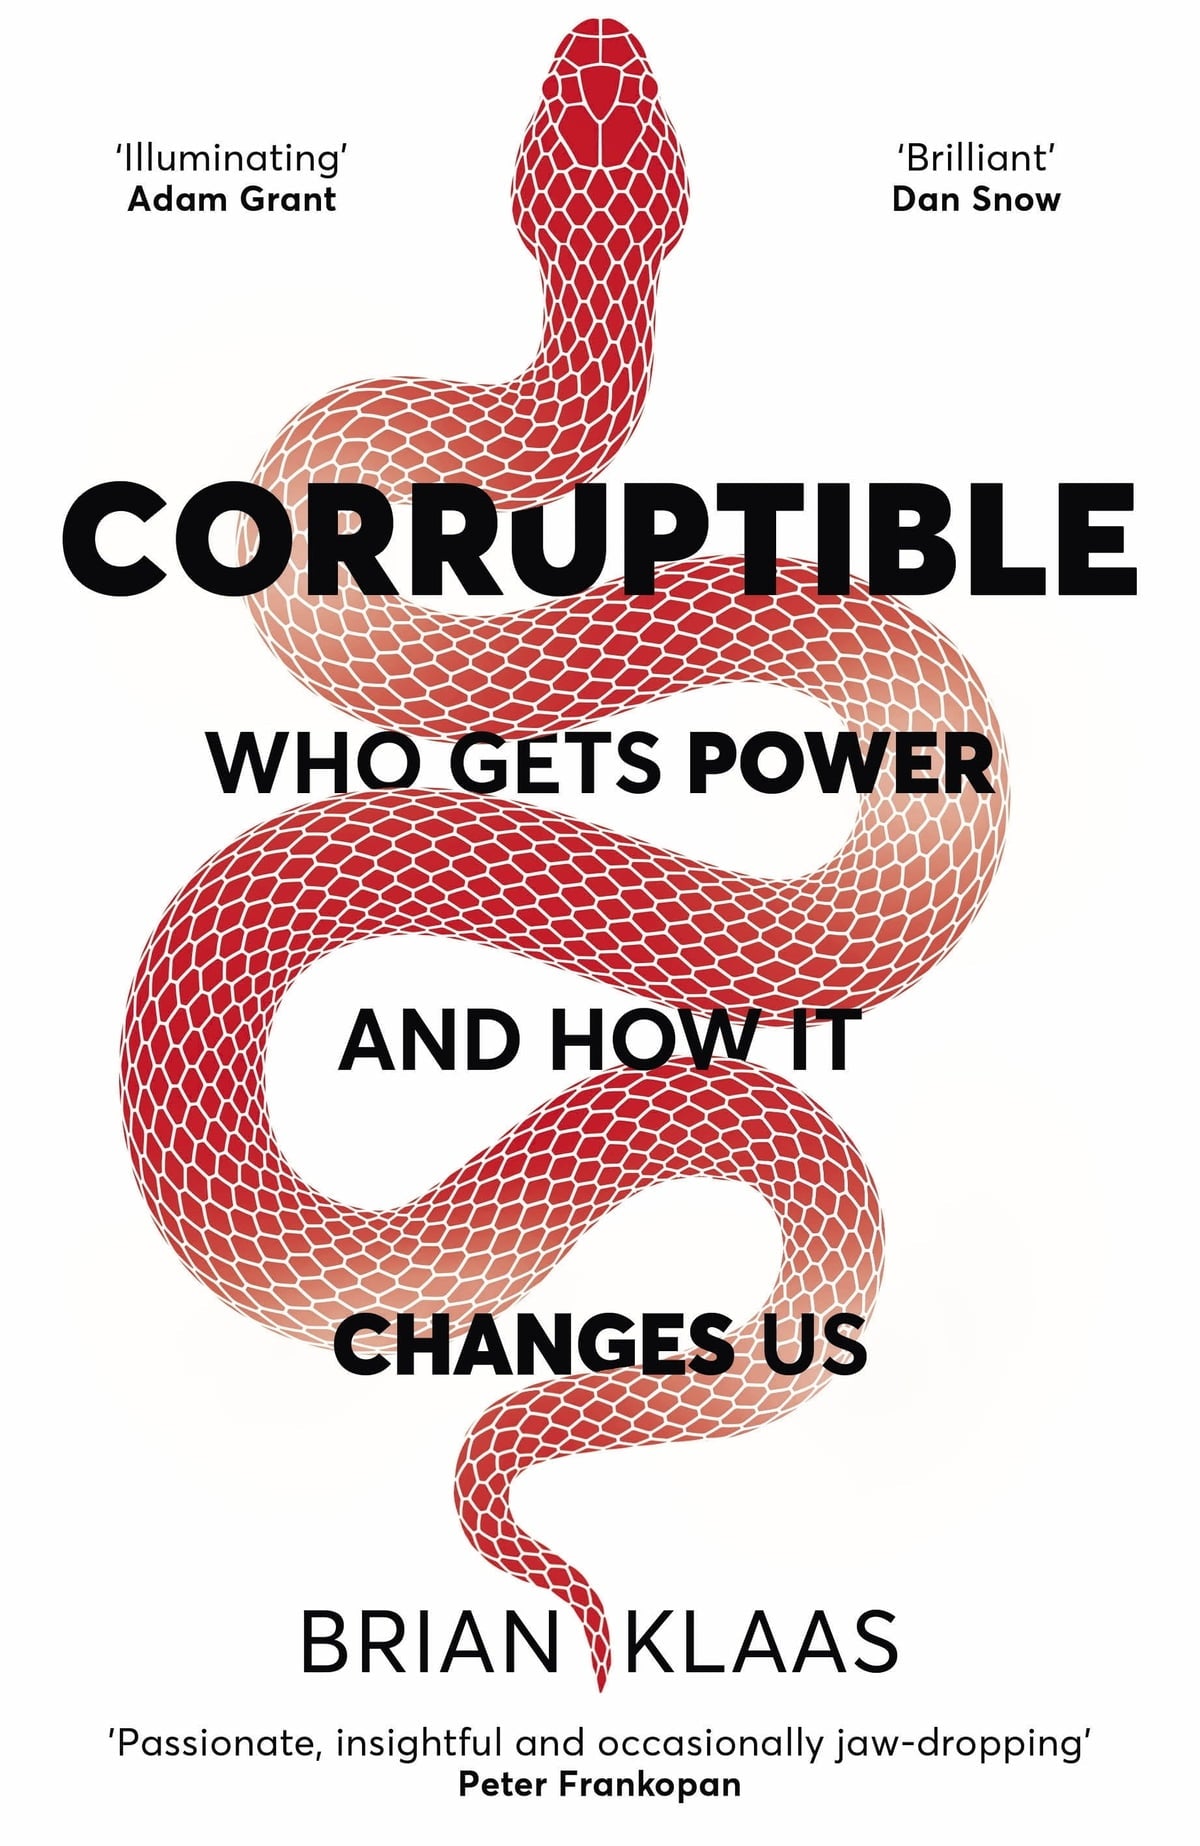 Corruptible: Who Gets Power and How It Changes Us by Brian Klaas